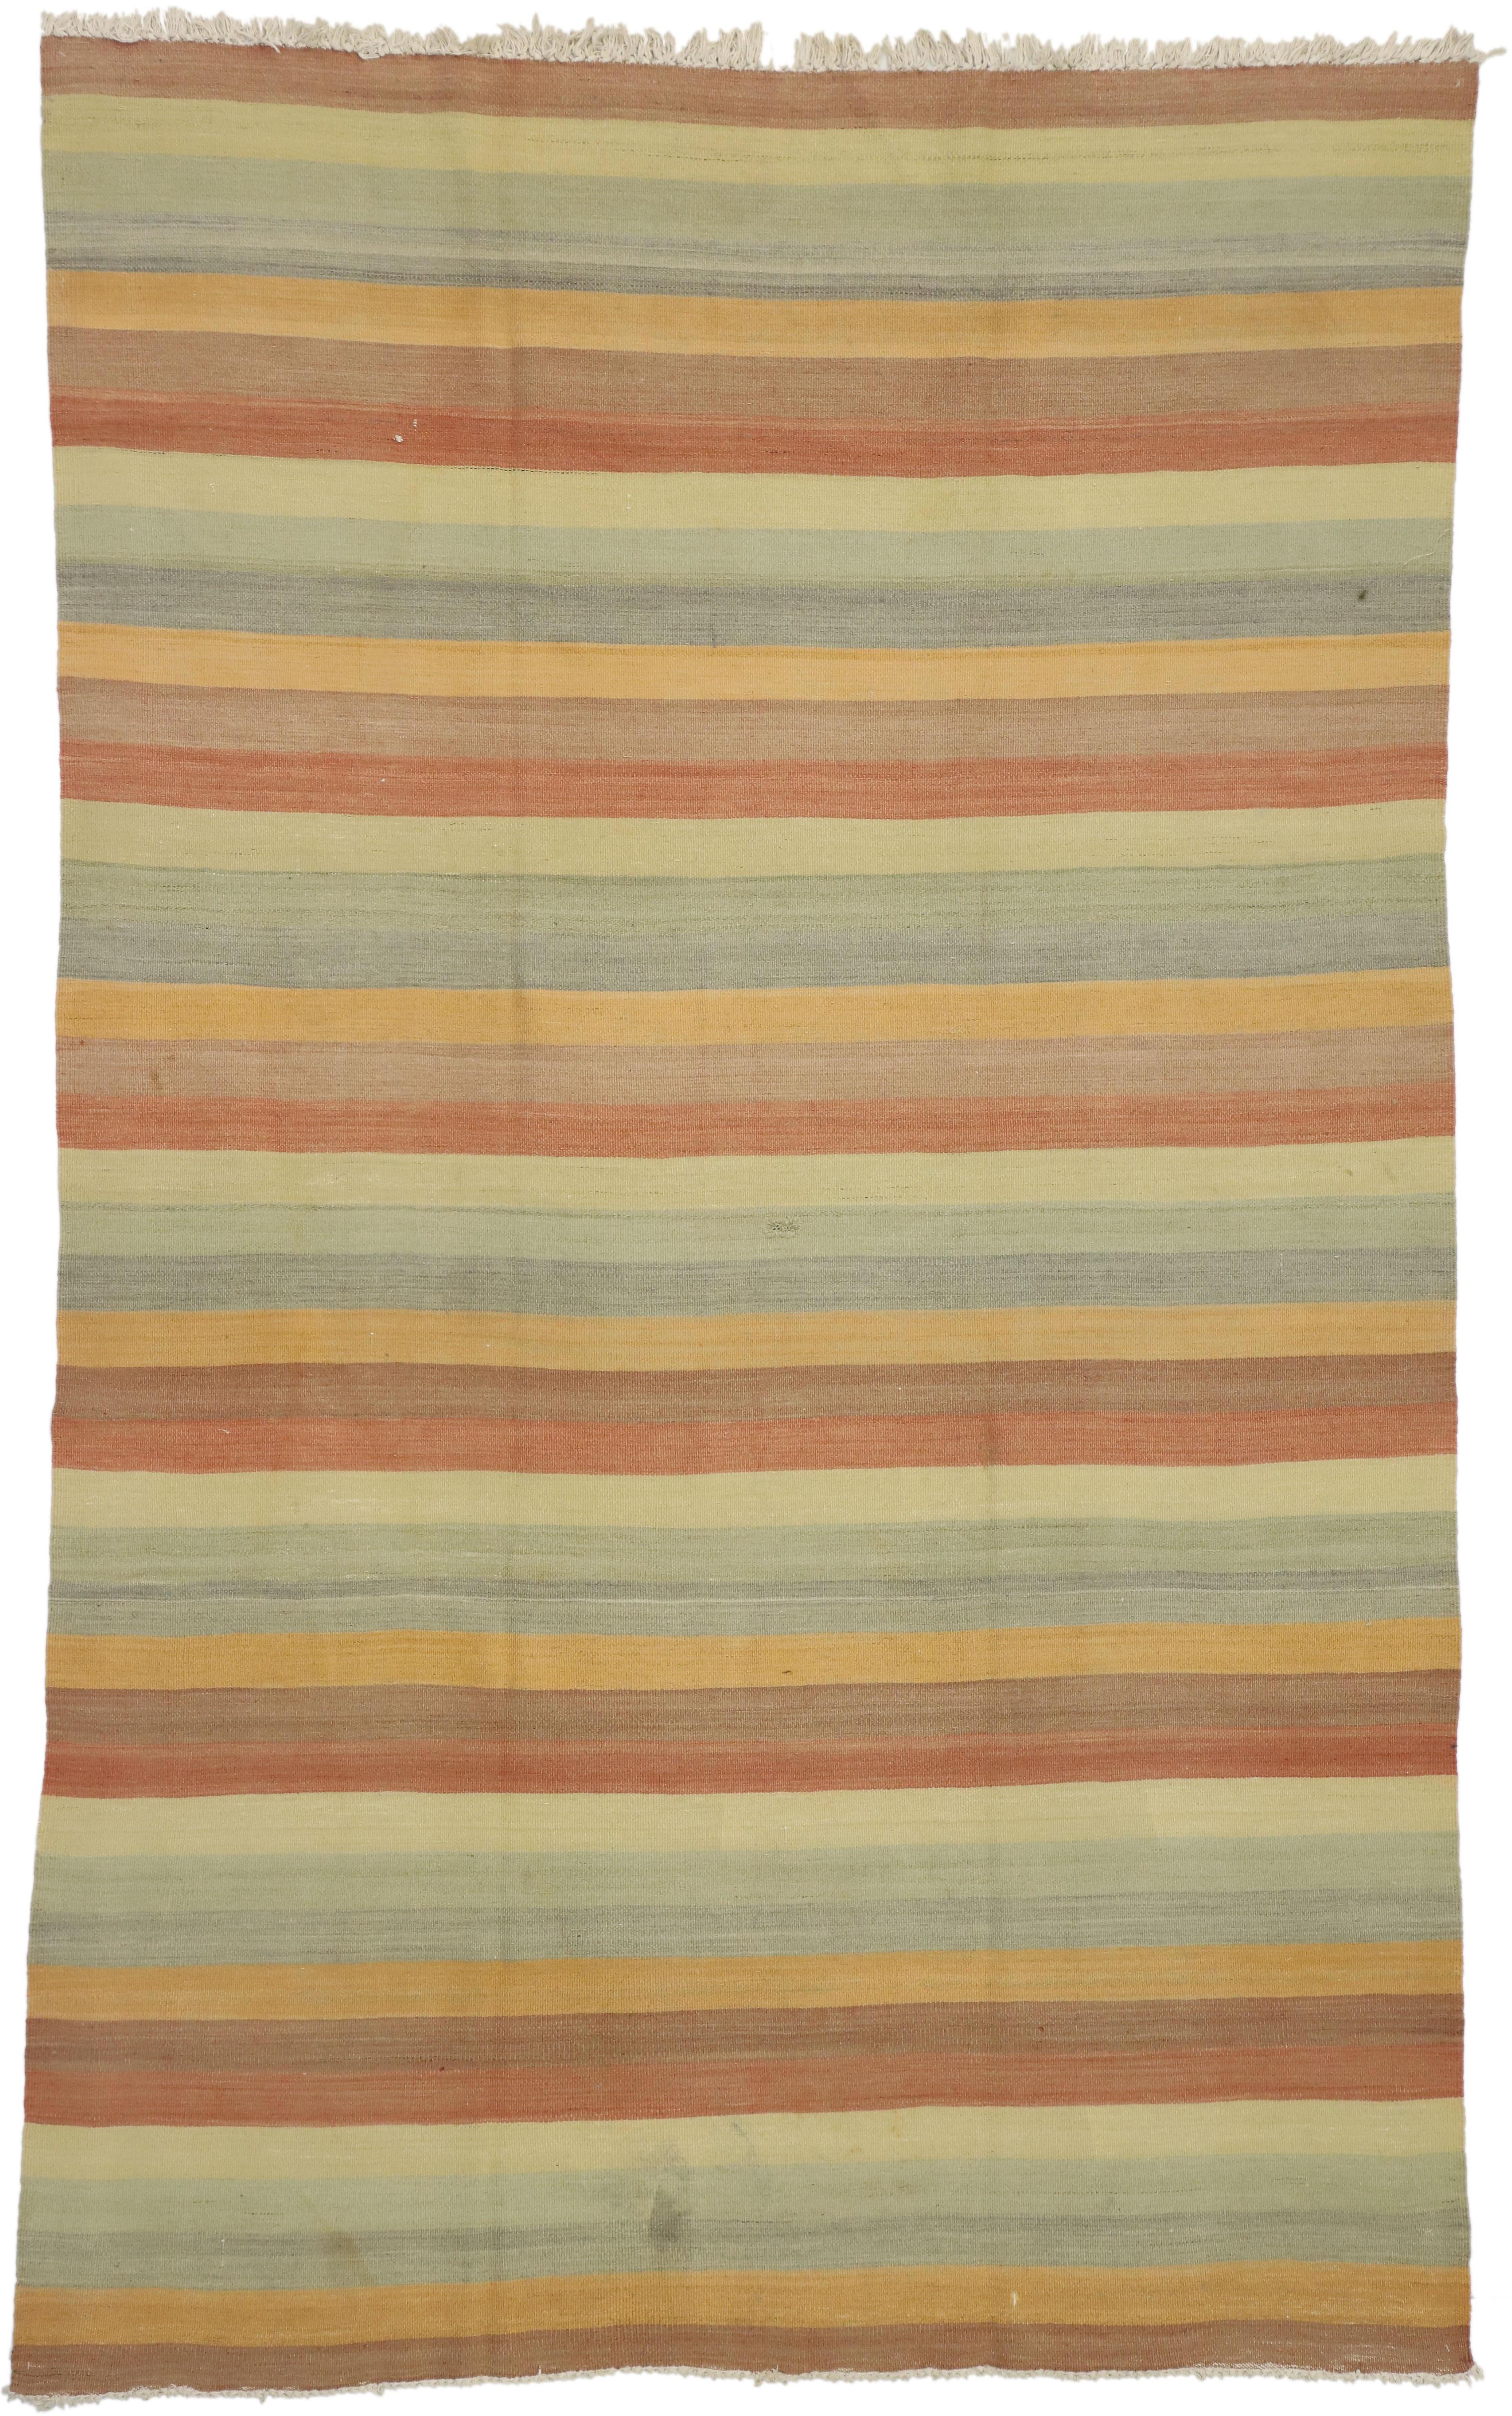 51663 Vintage Turkish Kilim Rug with Stripes and Soft Colors, Flat-Weave Rug 06'04 x 10'02. Reflecting a striking color palette from nature and modern style, this hand-woven wool vintage kilim rug embodies a rustic modern cabin style. The field us